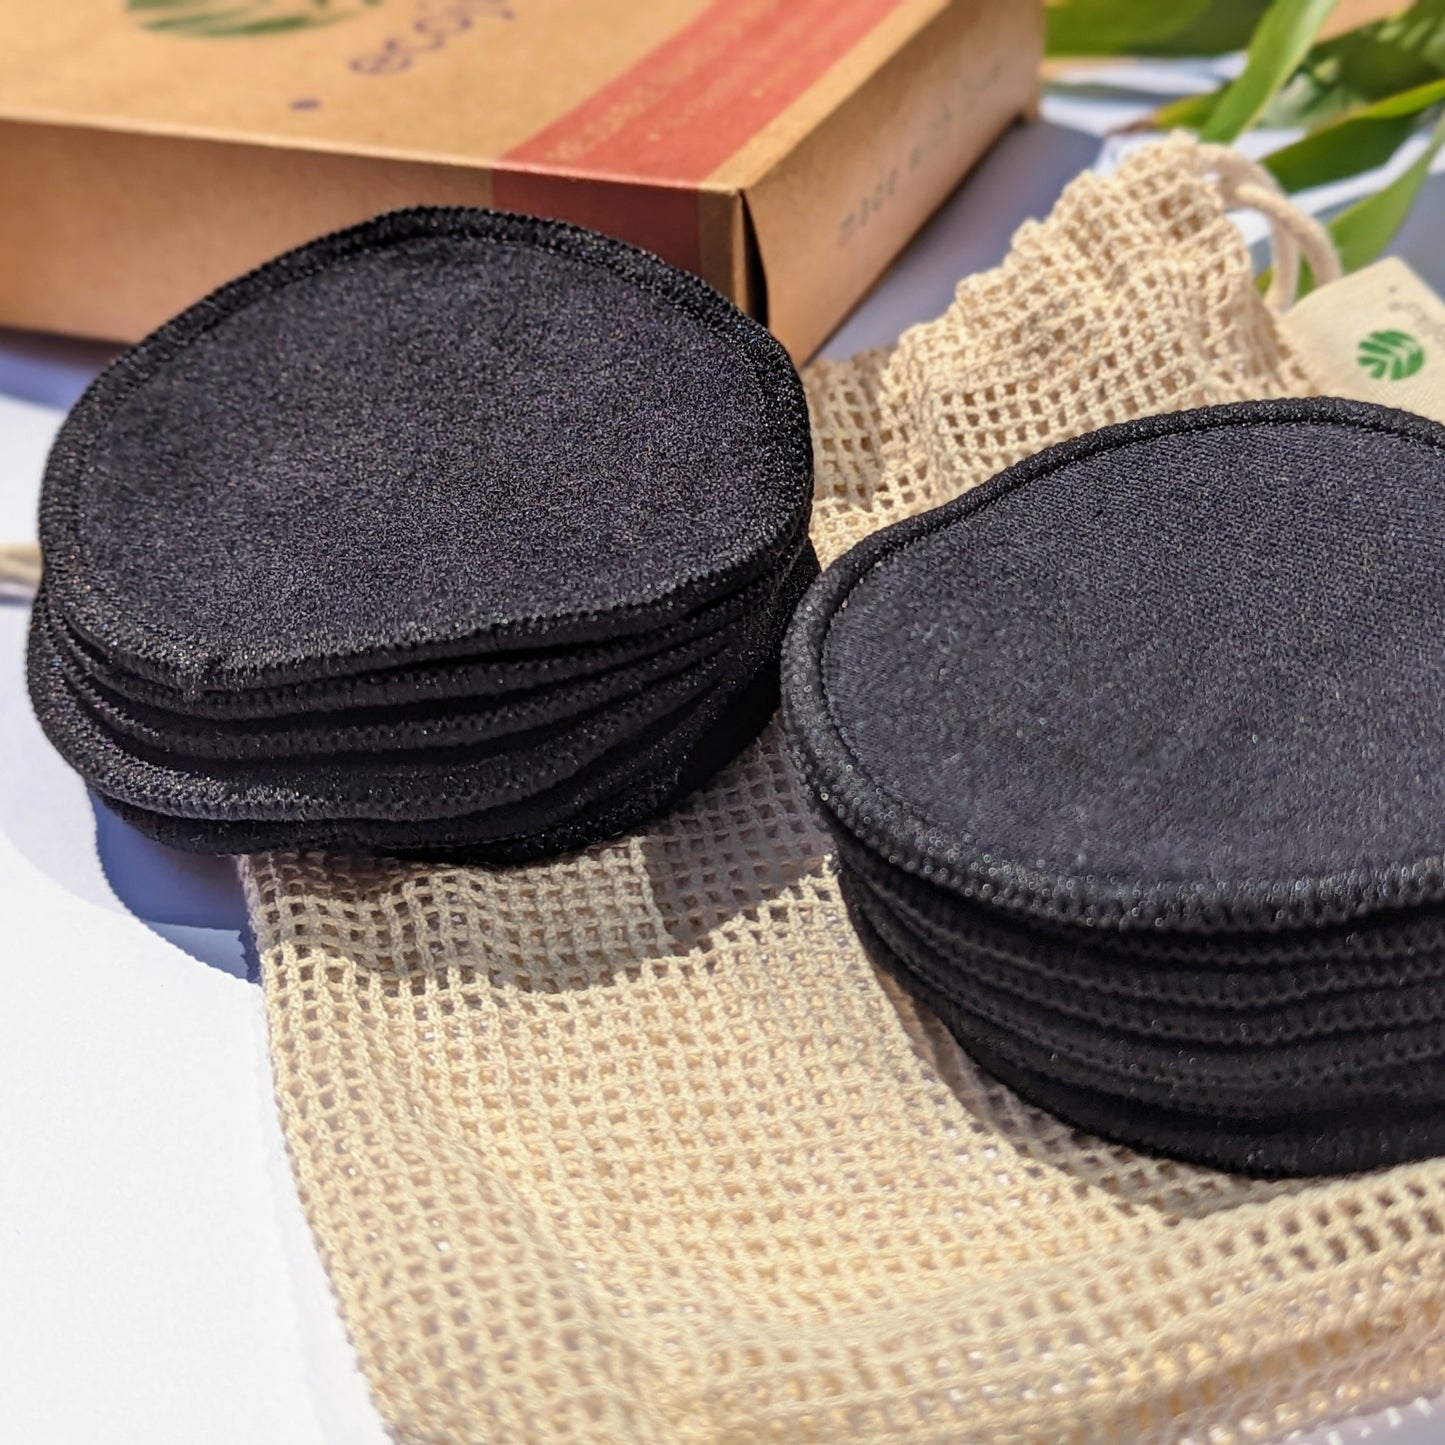 eco friendly reusable make up remover pads